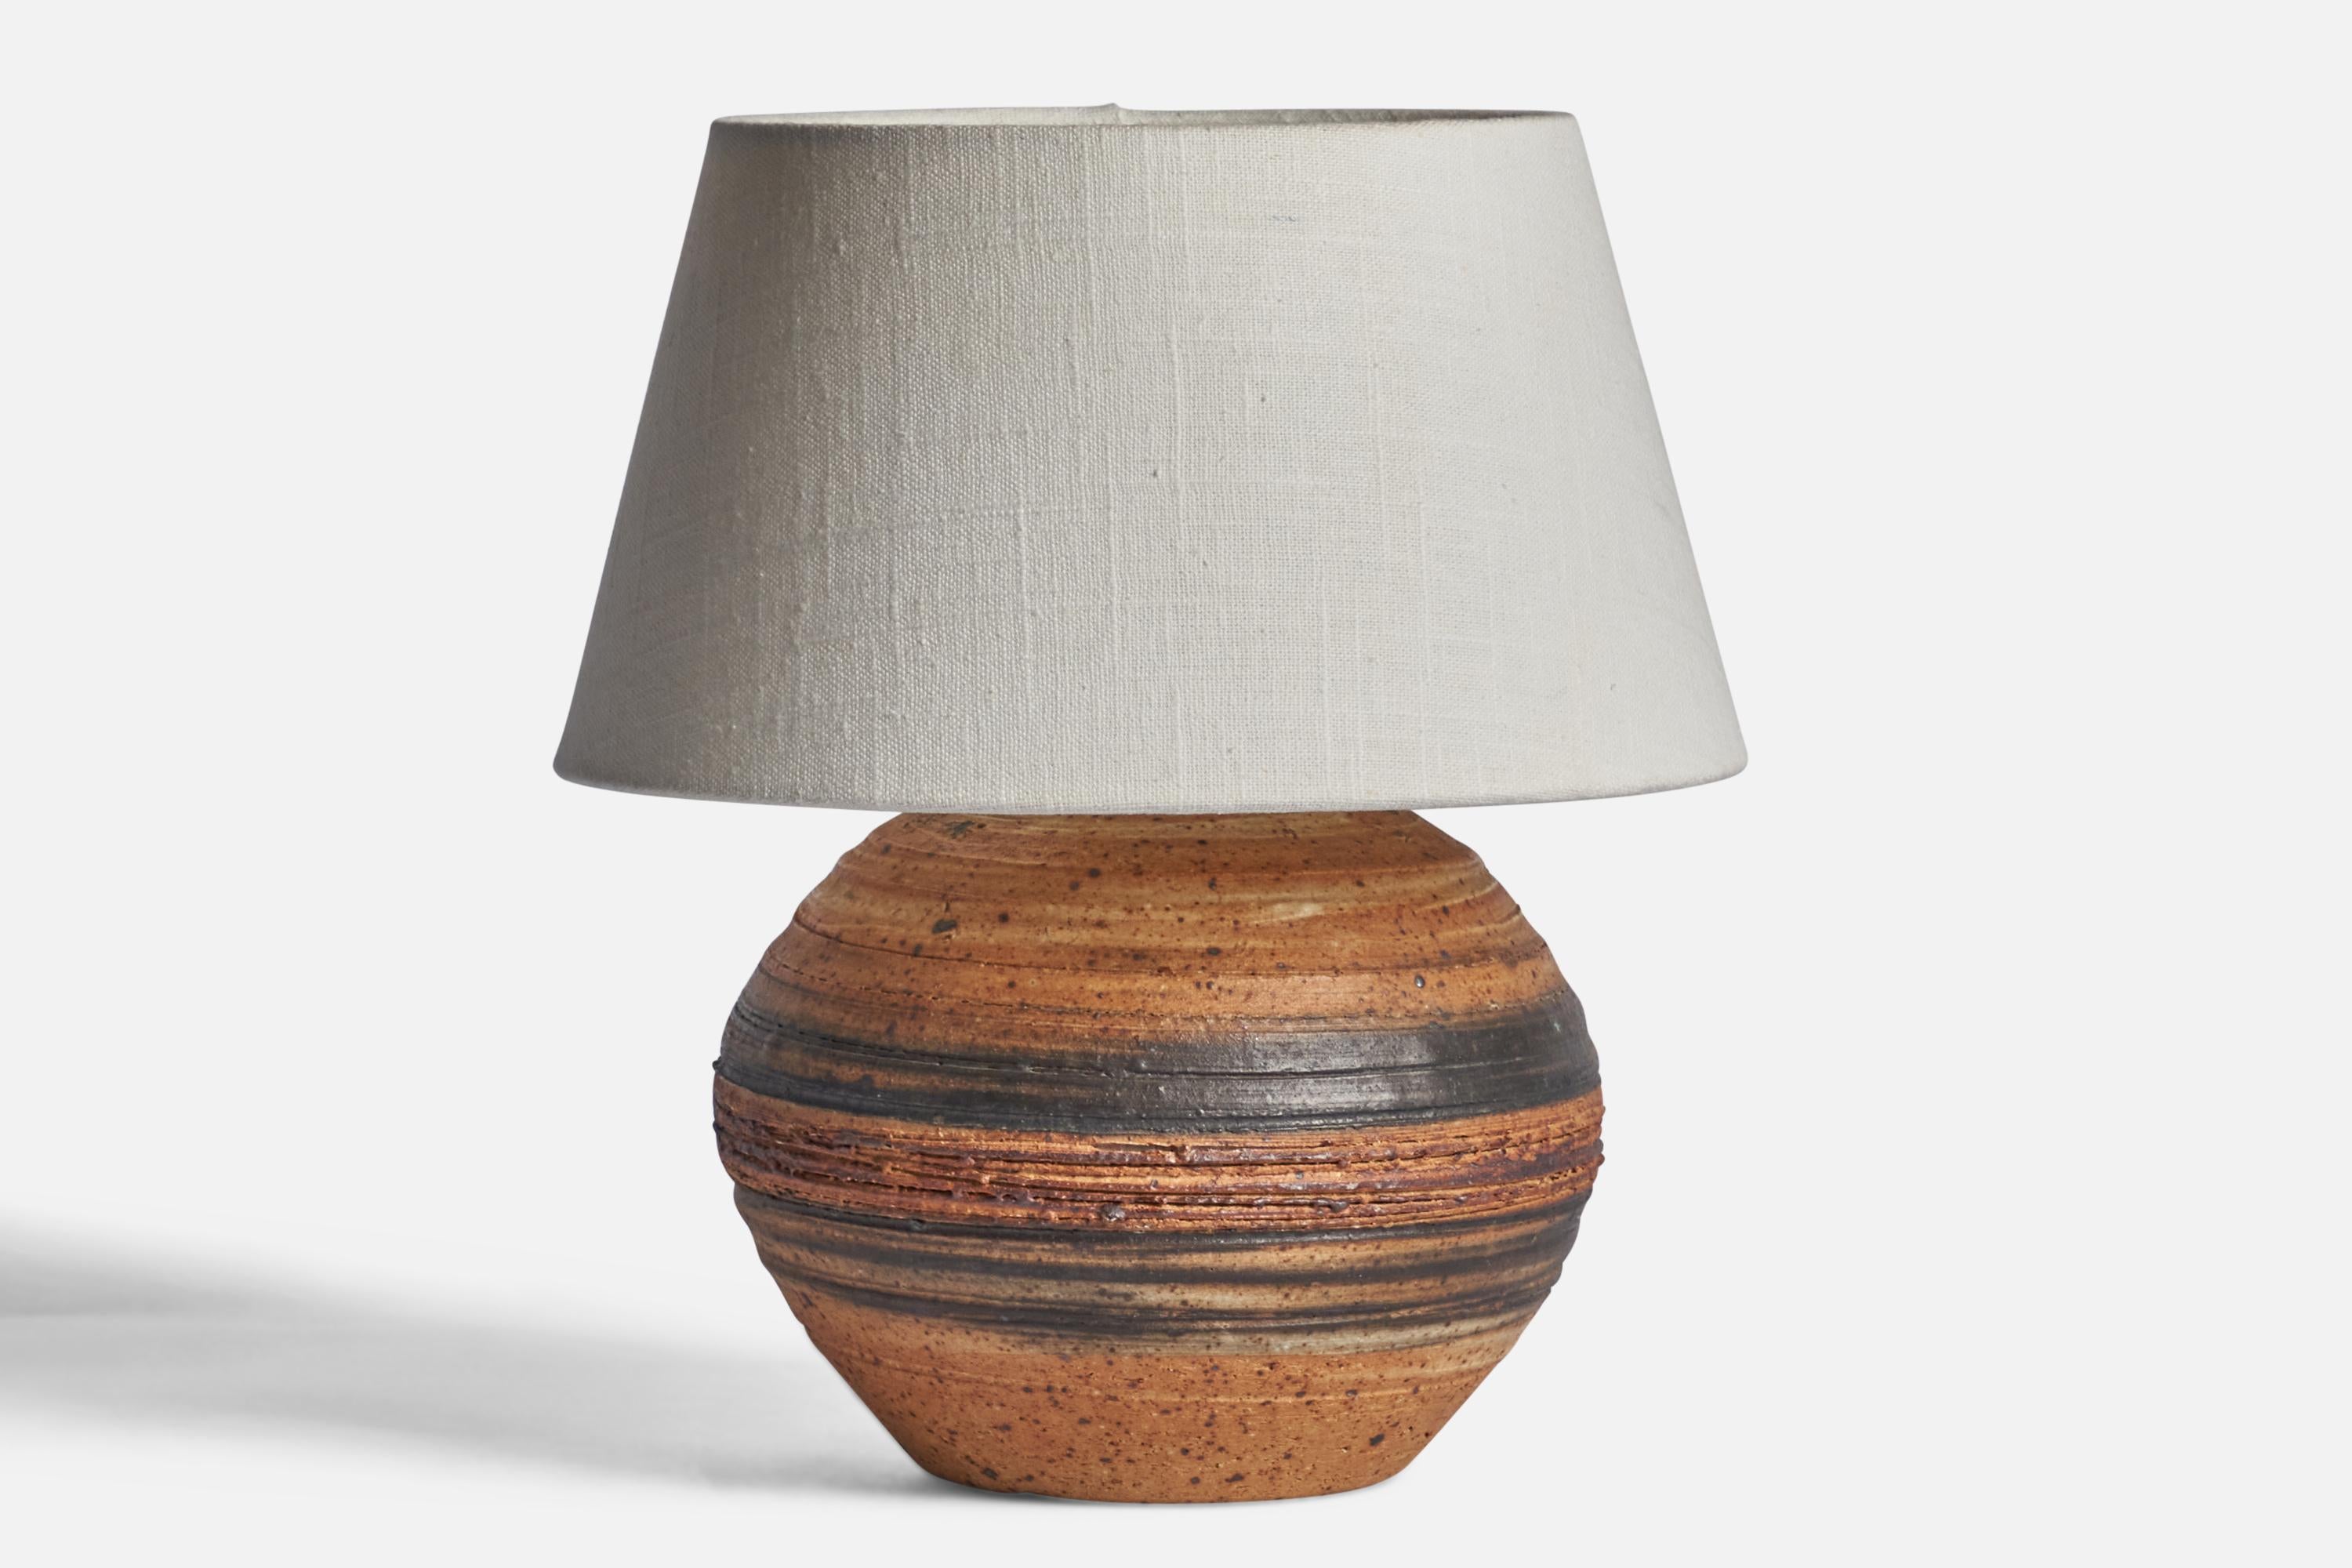 A brown and black-painted stoneware table lamp designed and produced by Tue Poulsen, Denmark, 1960s.

Dimensions of Lamp (inches): 8.5